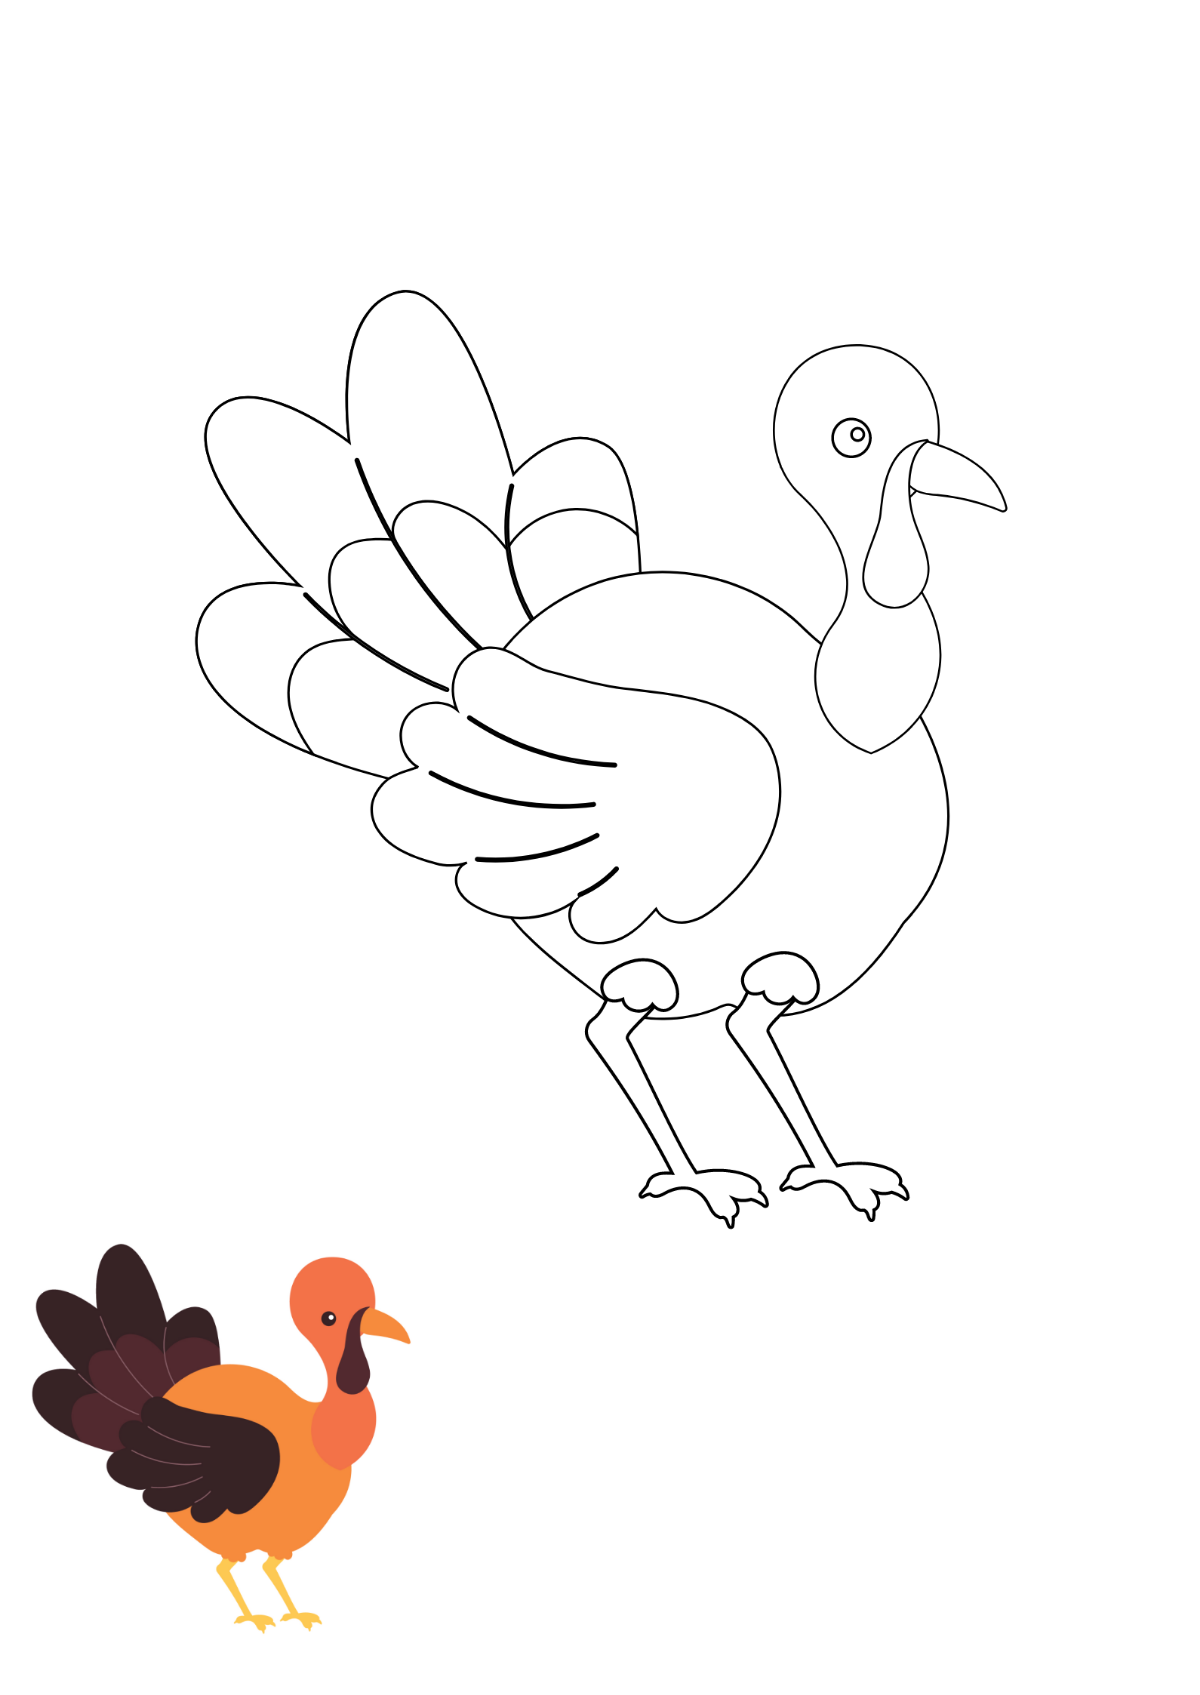 Blank Turkey Coloring Page Template